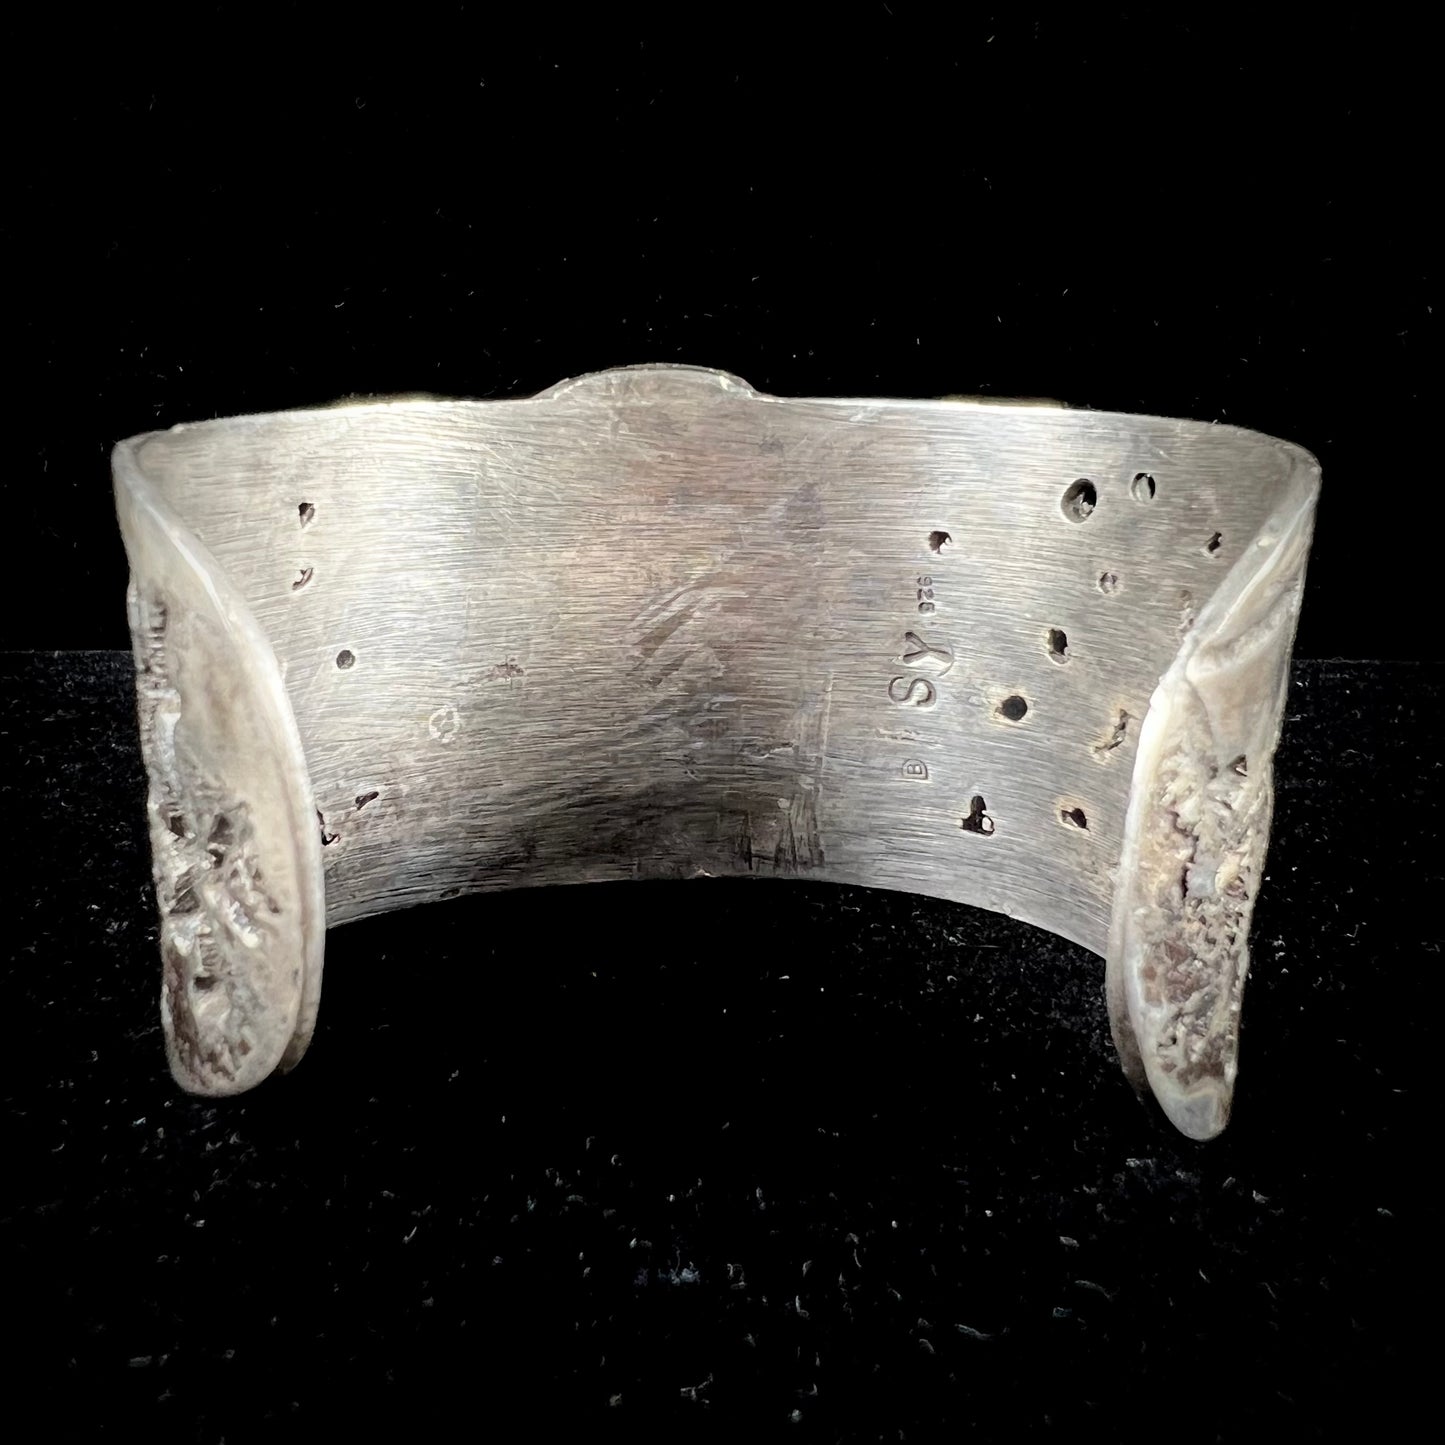 A men's sterling silver cuff bracelet infused with copper and set with a green turquoise stone from Carico Lake, Nevada.